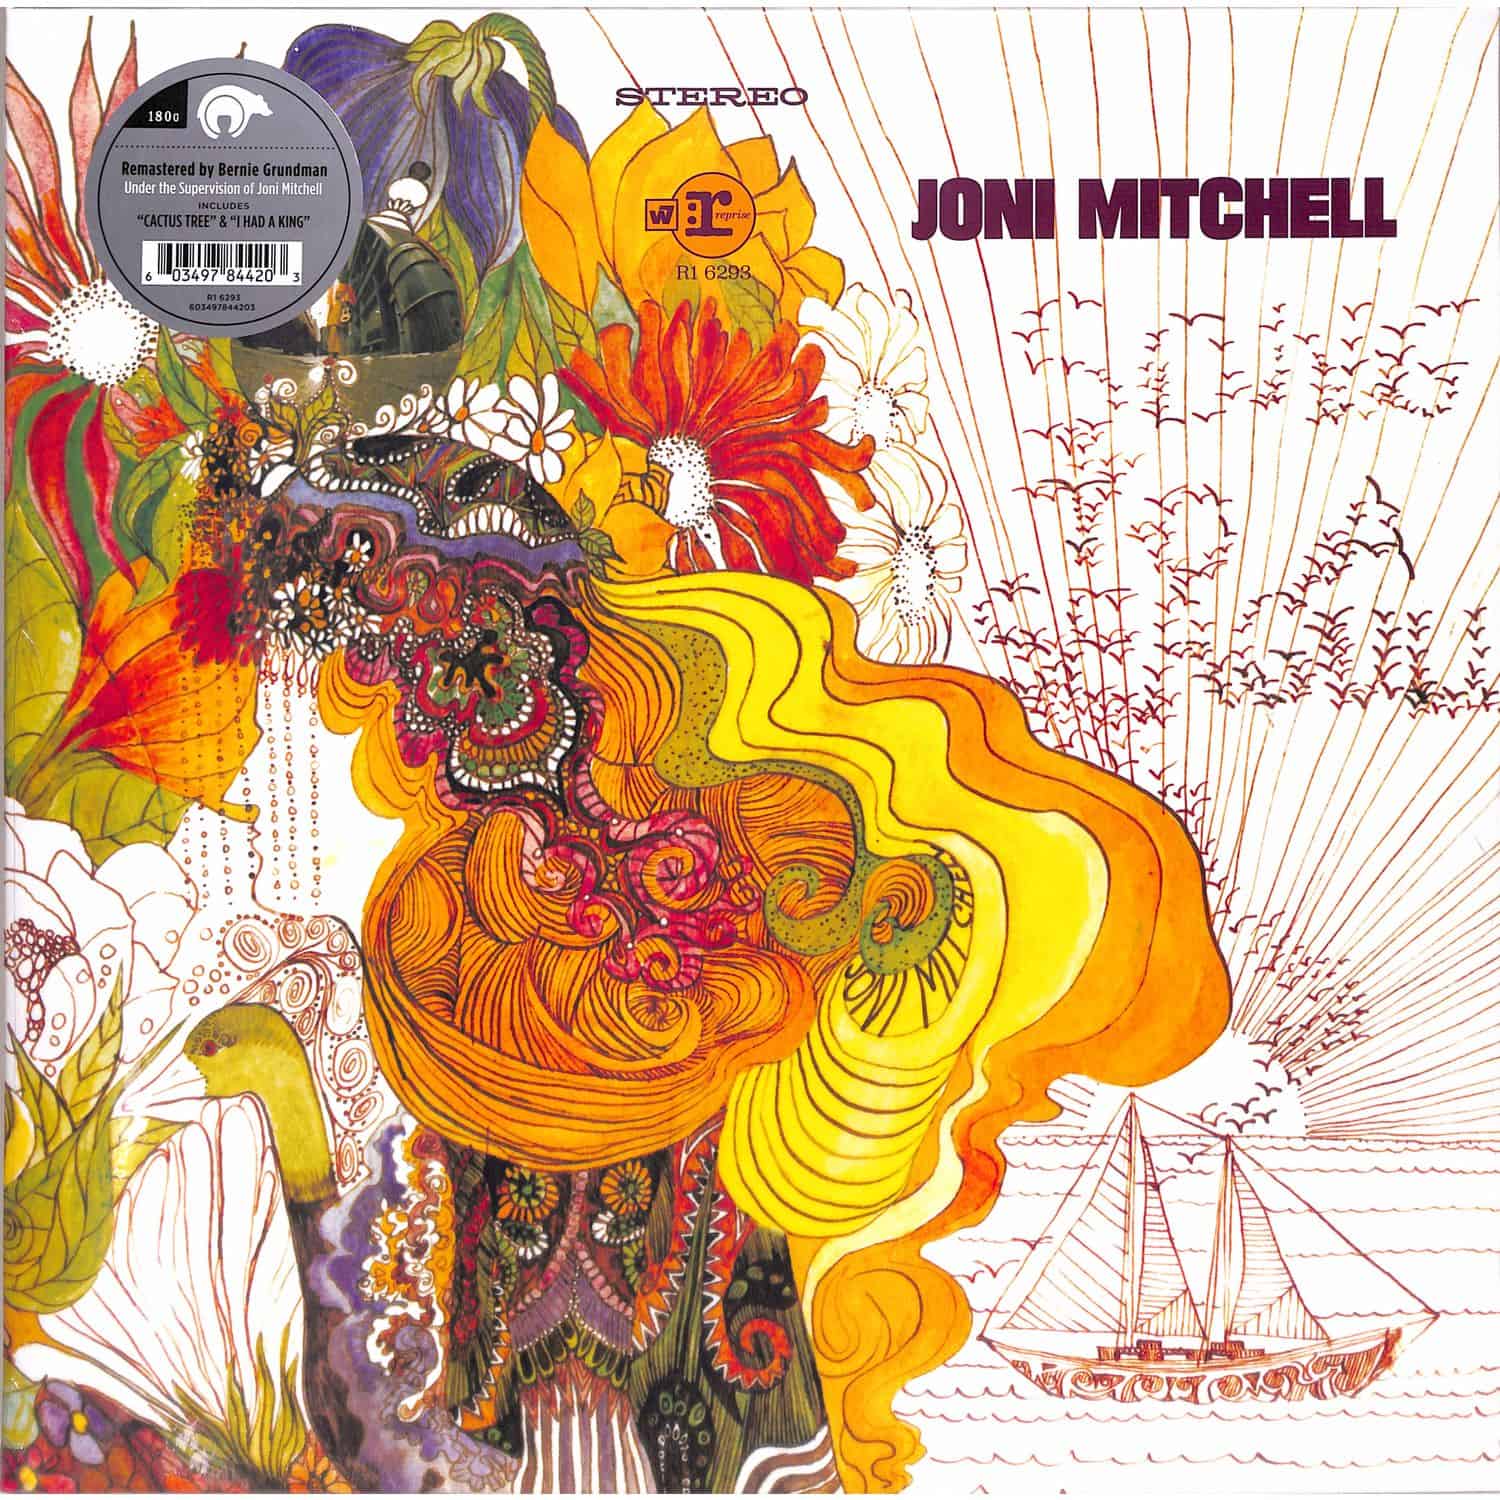 Joni Mitchell - SONG TO A SEAGULL 